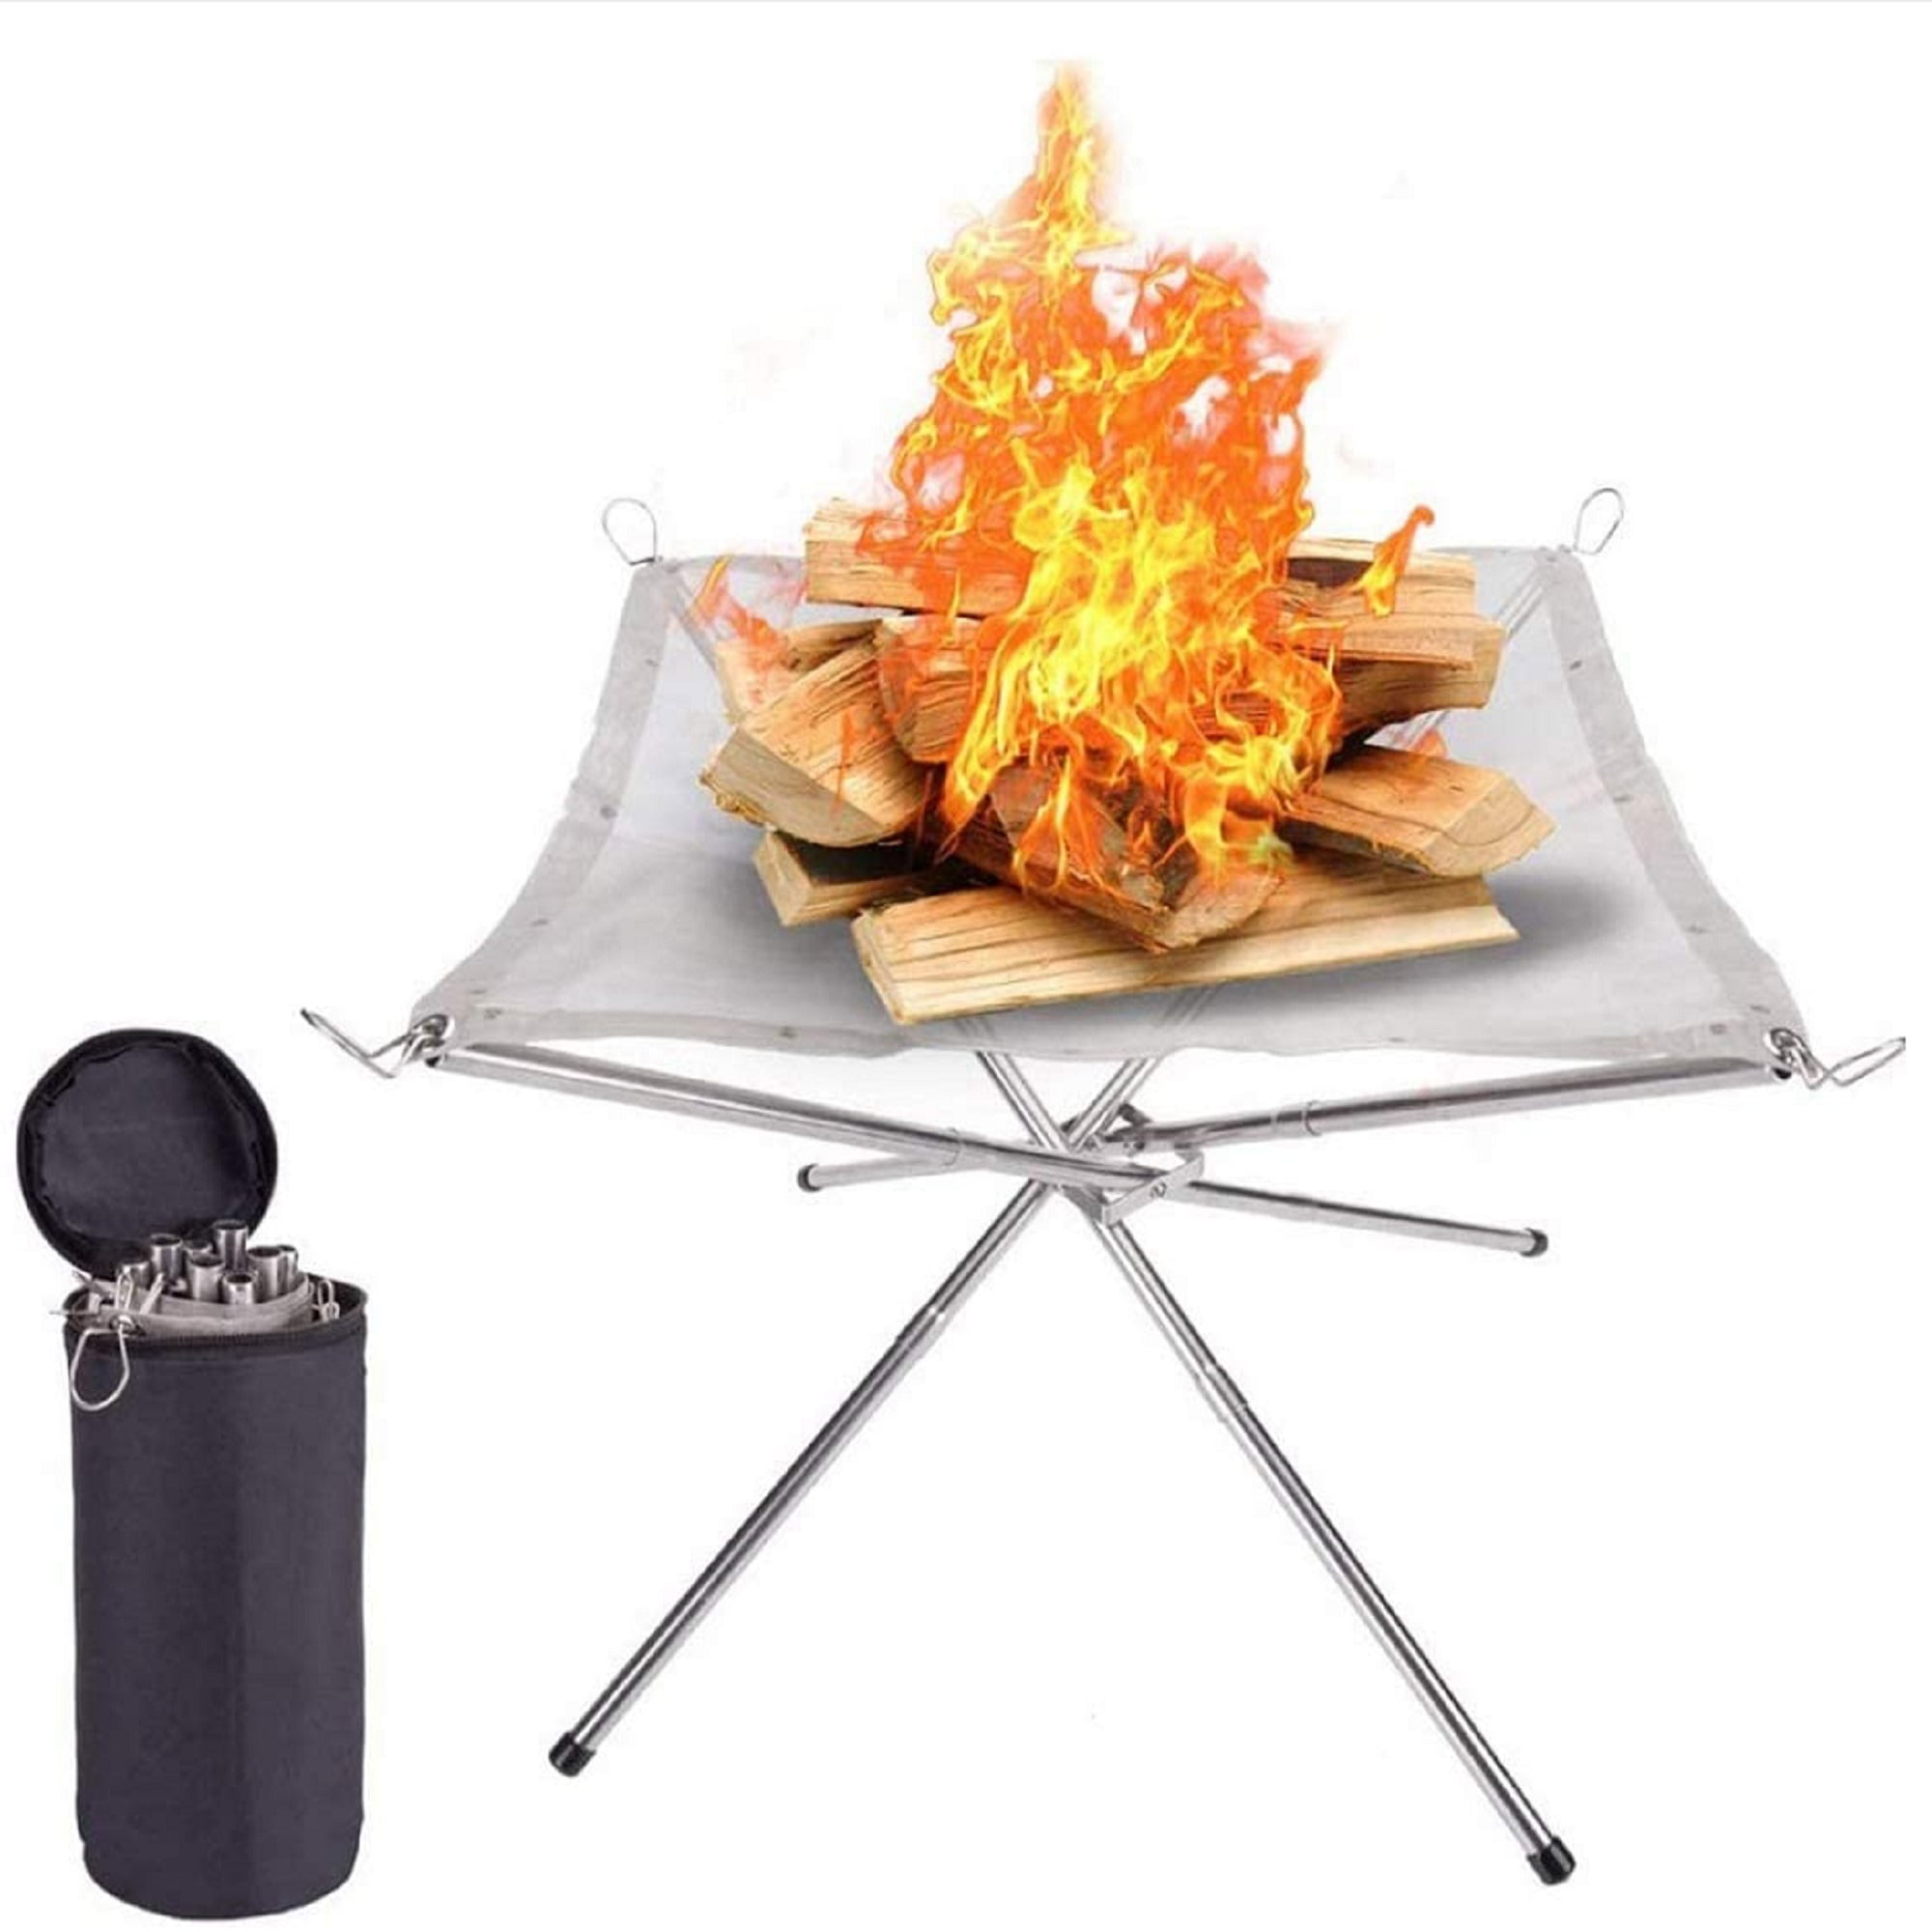 Collapsing Steel Mesh Large Rootless Large Portable Outdoor Fire Pit 